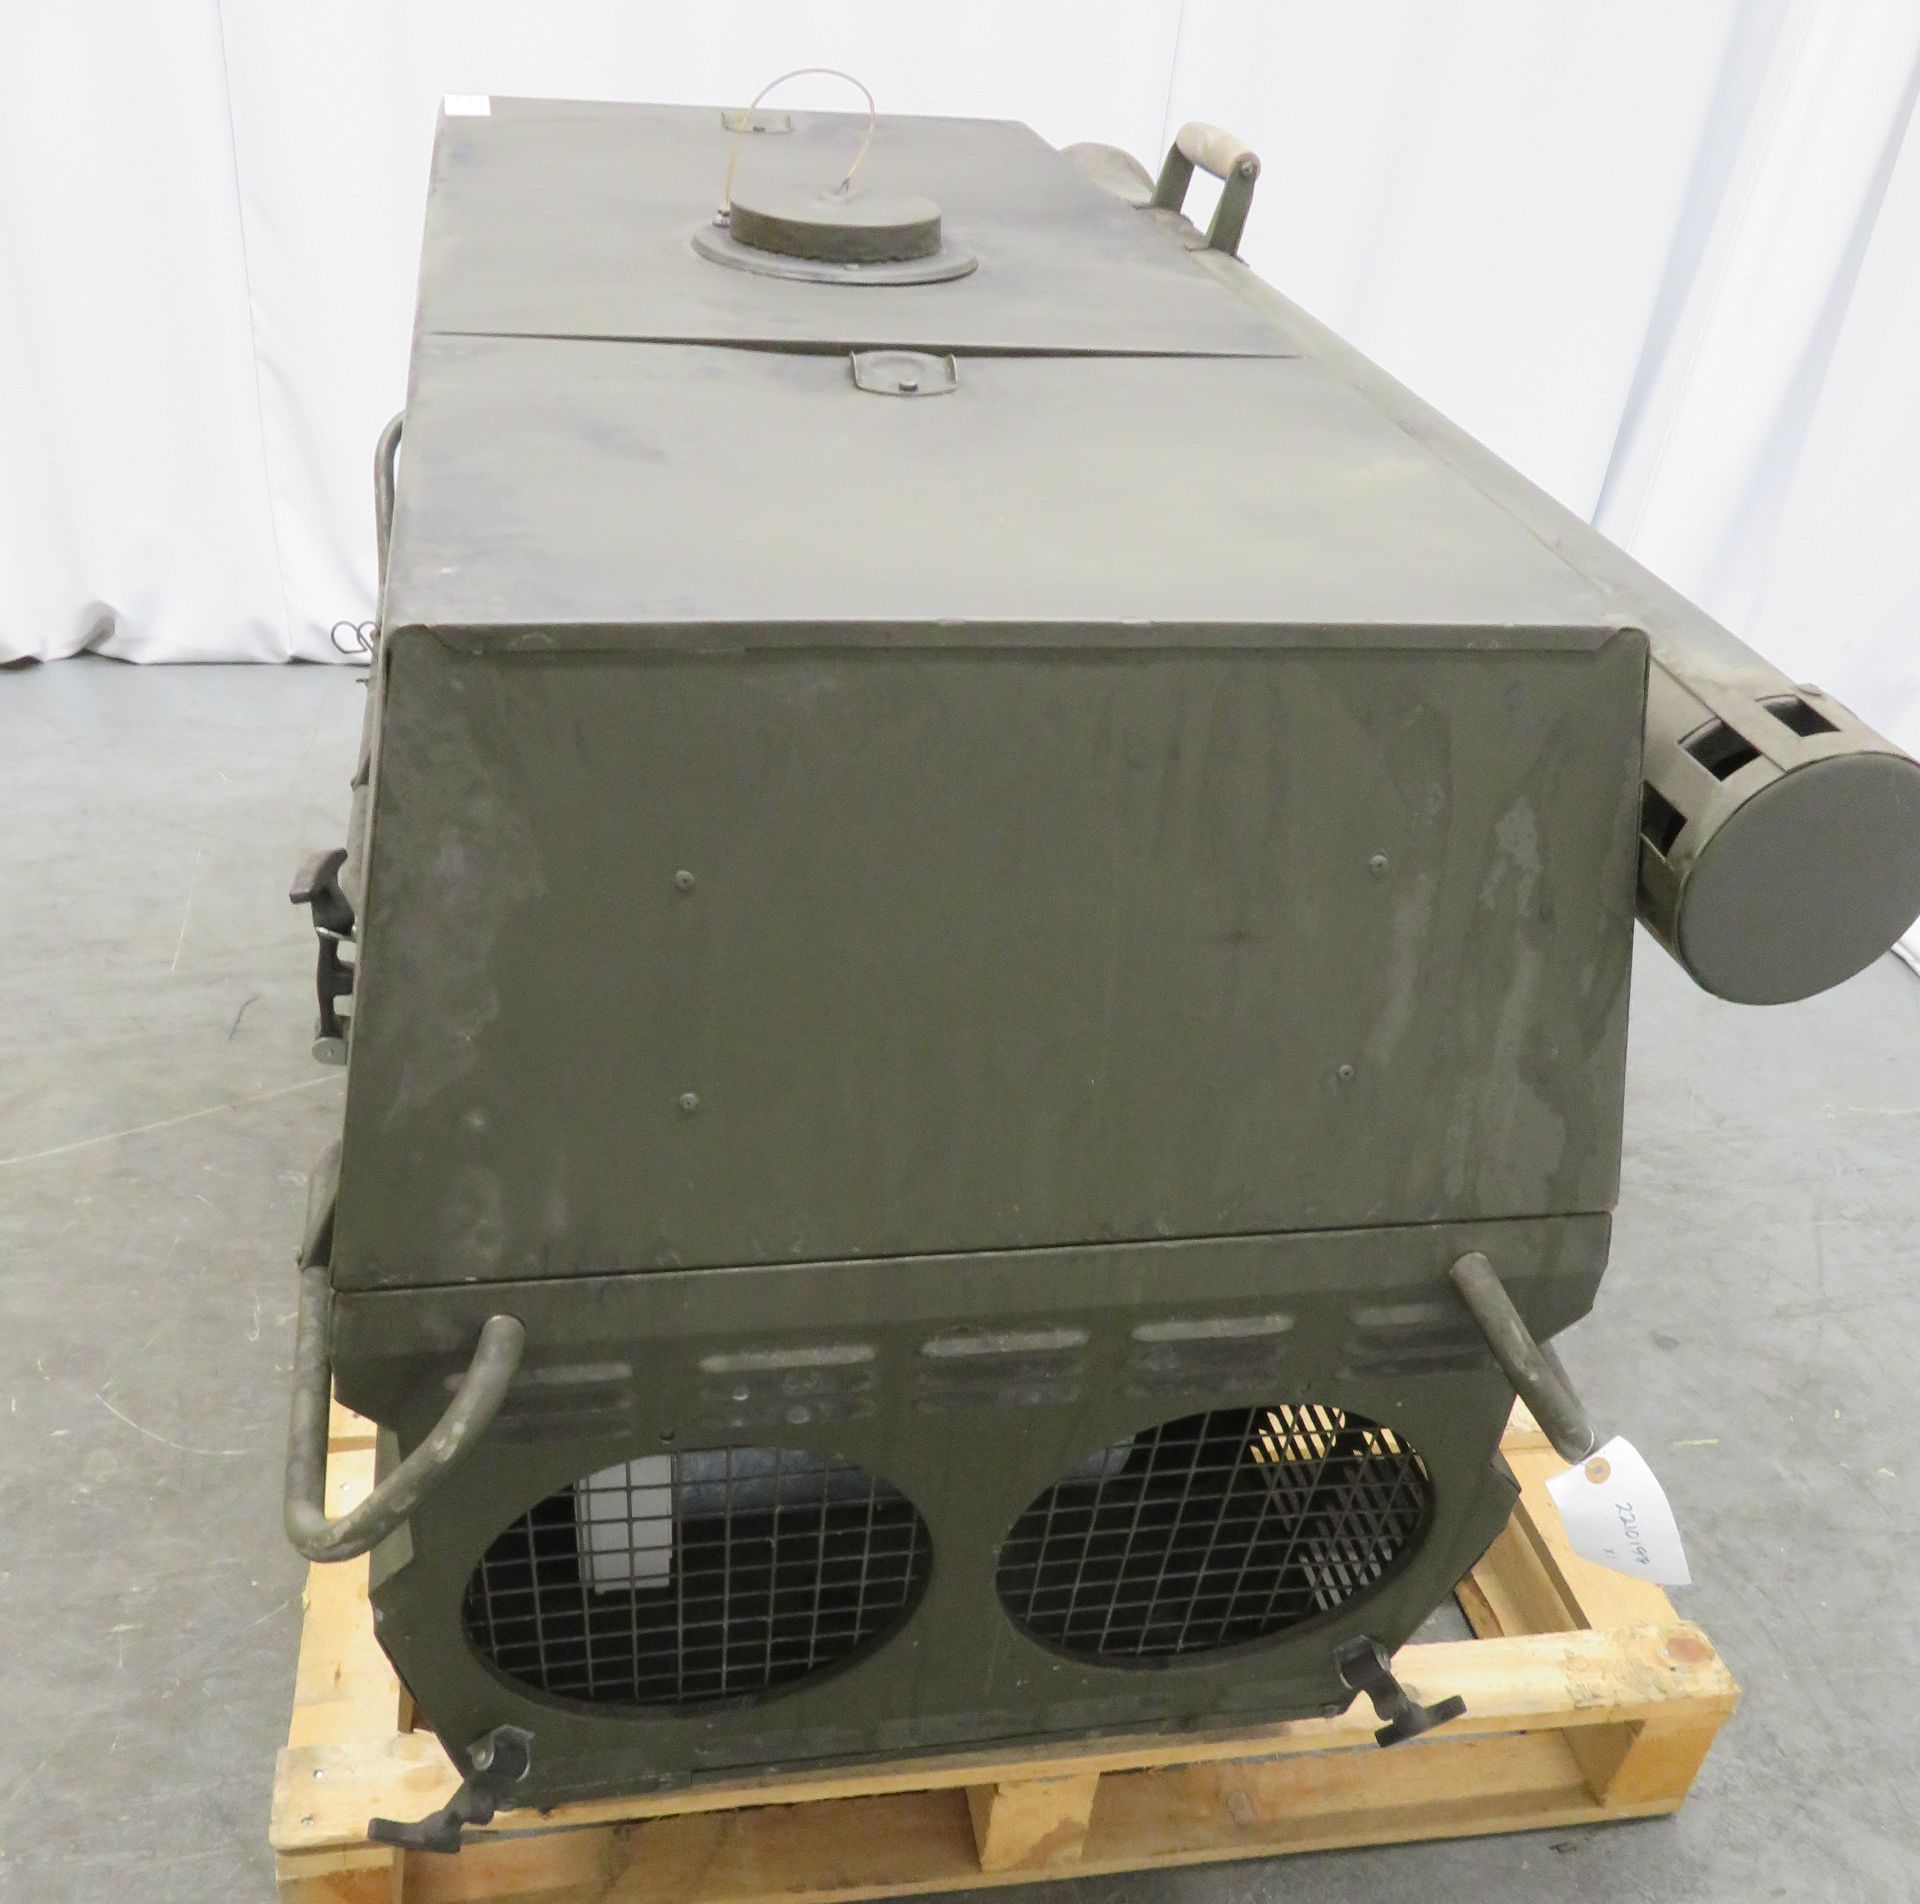 Dantherm 38kw Portable Diesel Fuel Heater VA-M40 - Hours Run - 319 - Untested. - Image 12 of 15